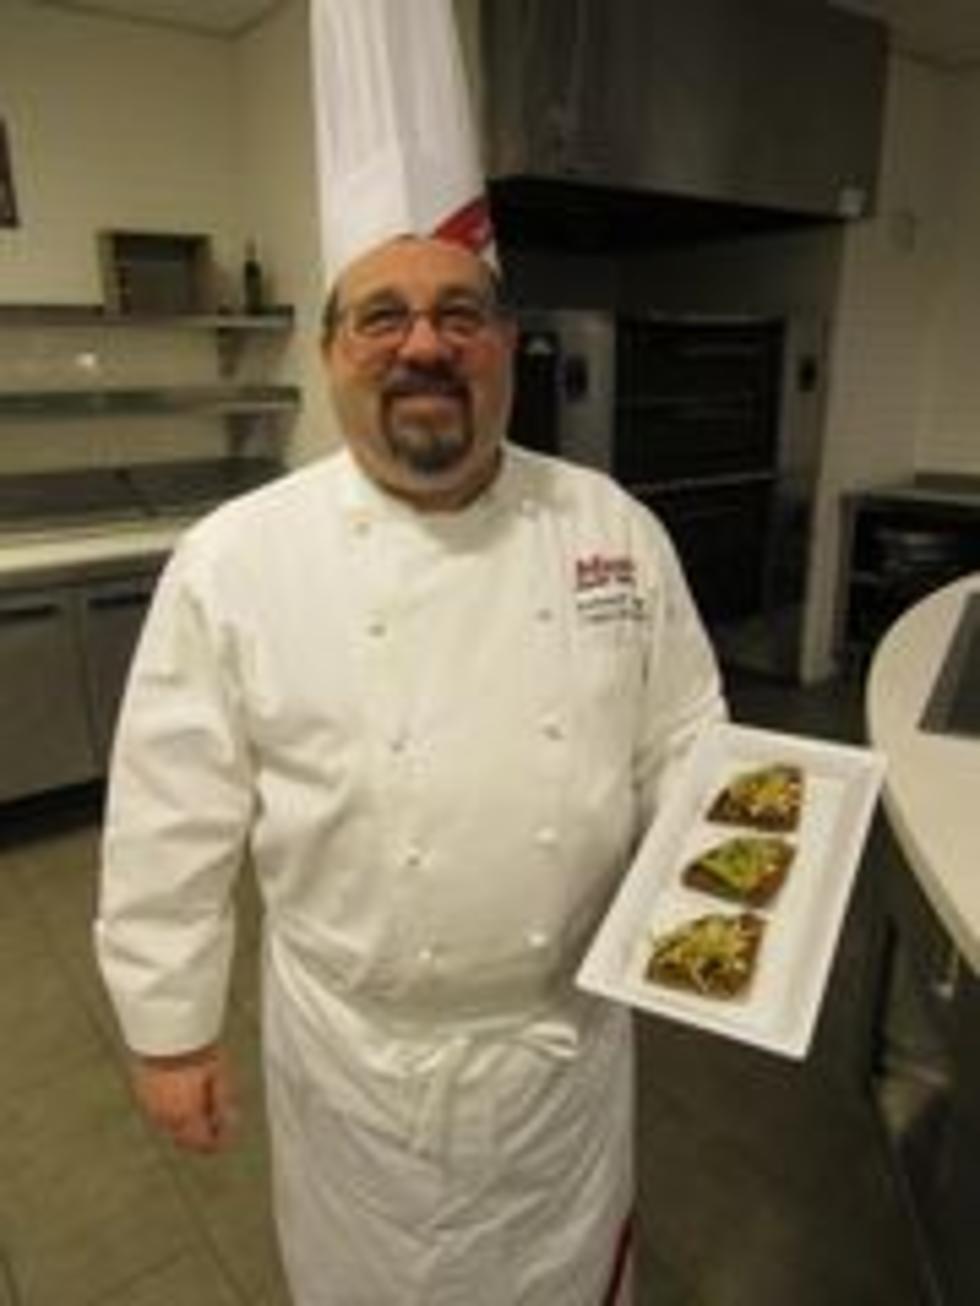 Local College Chef Wins National Award